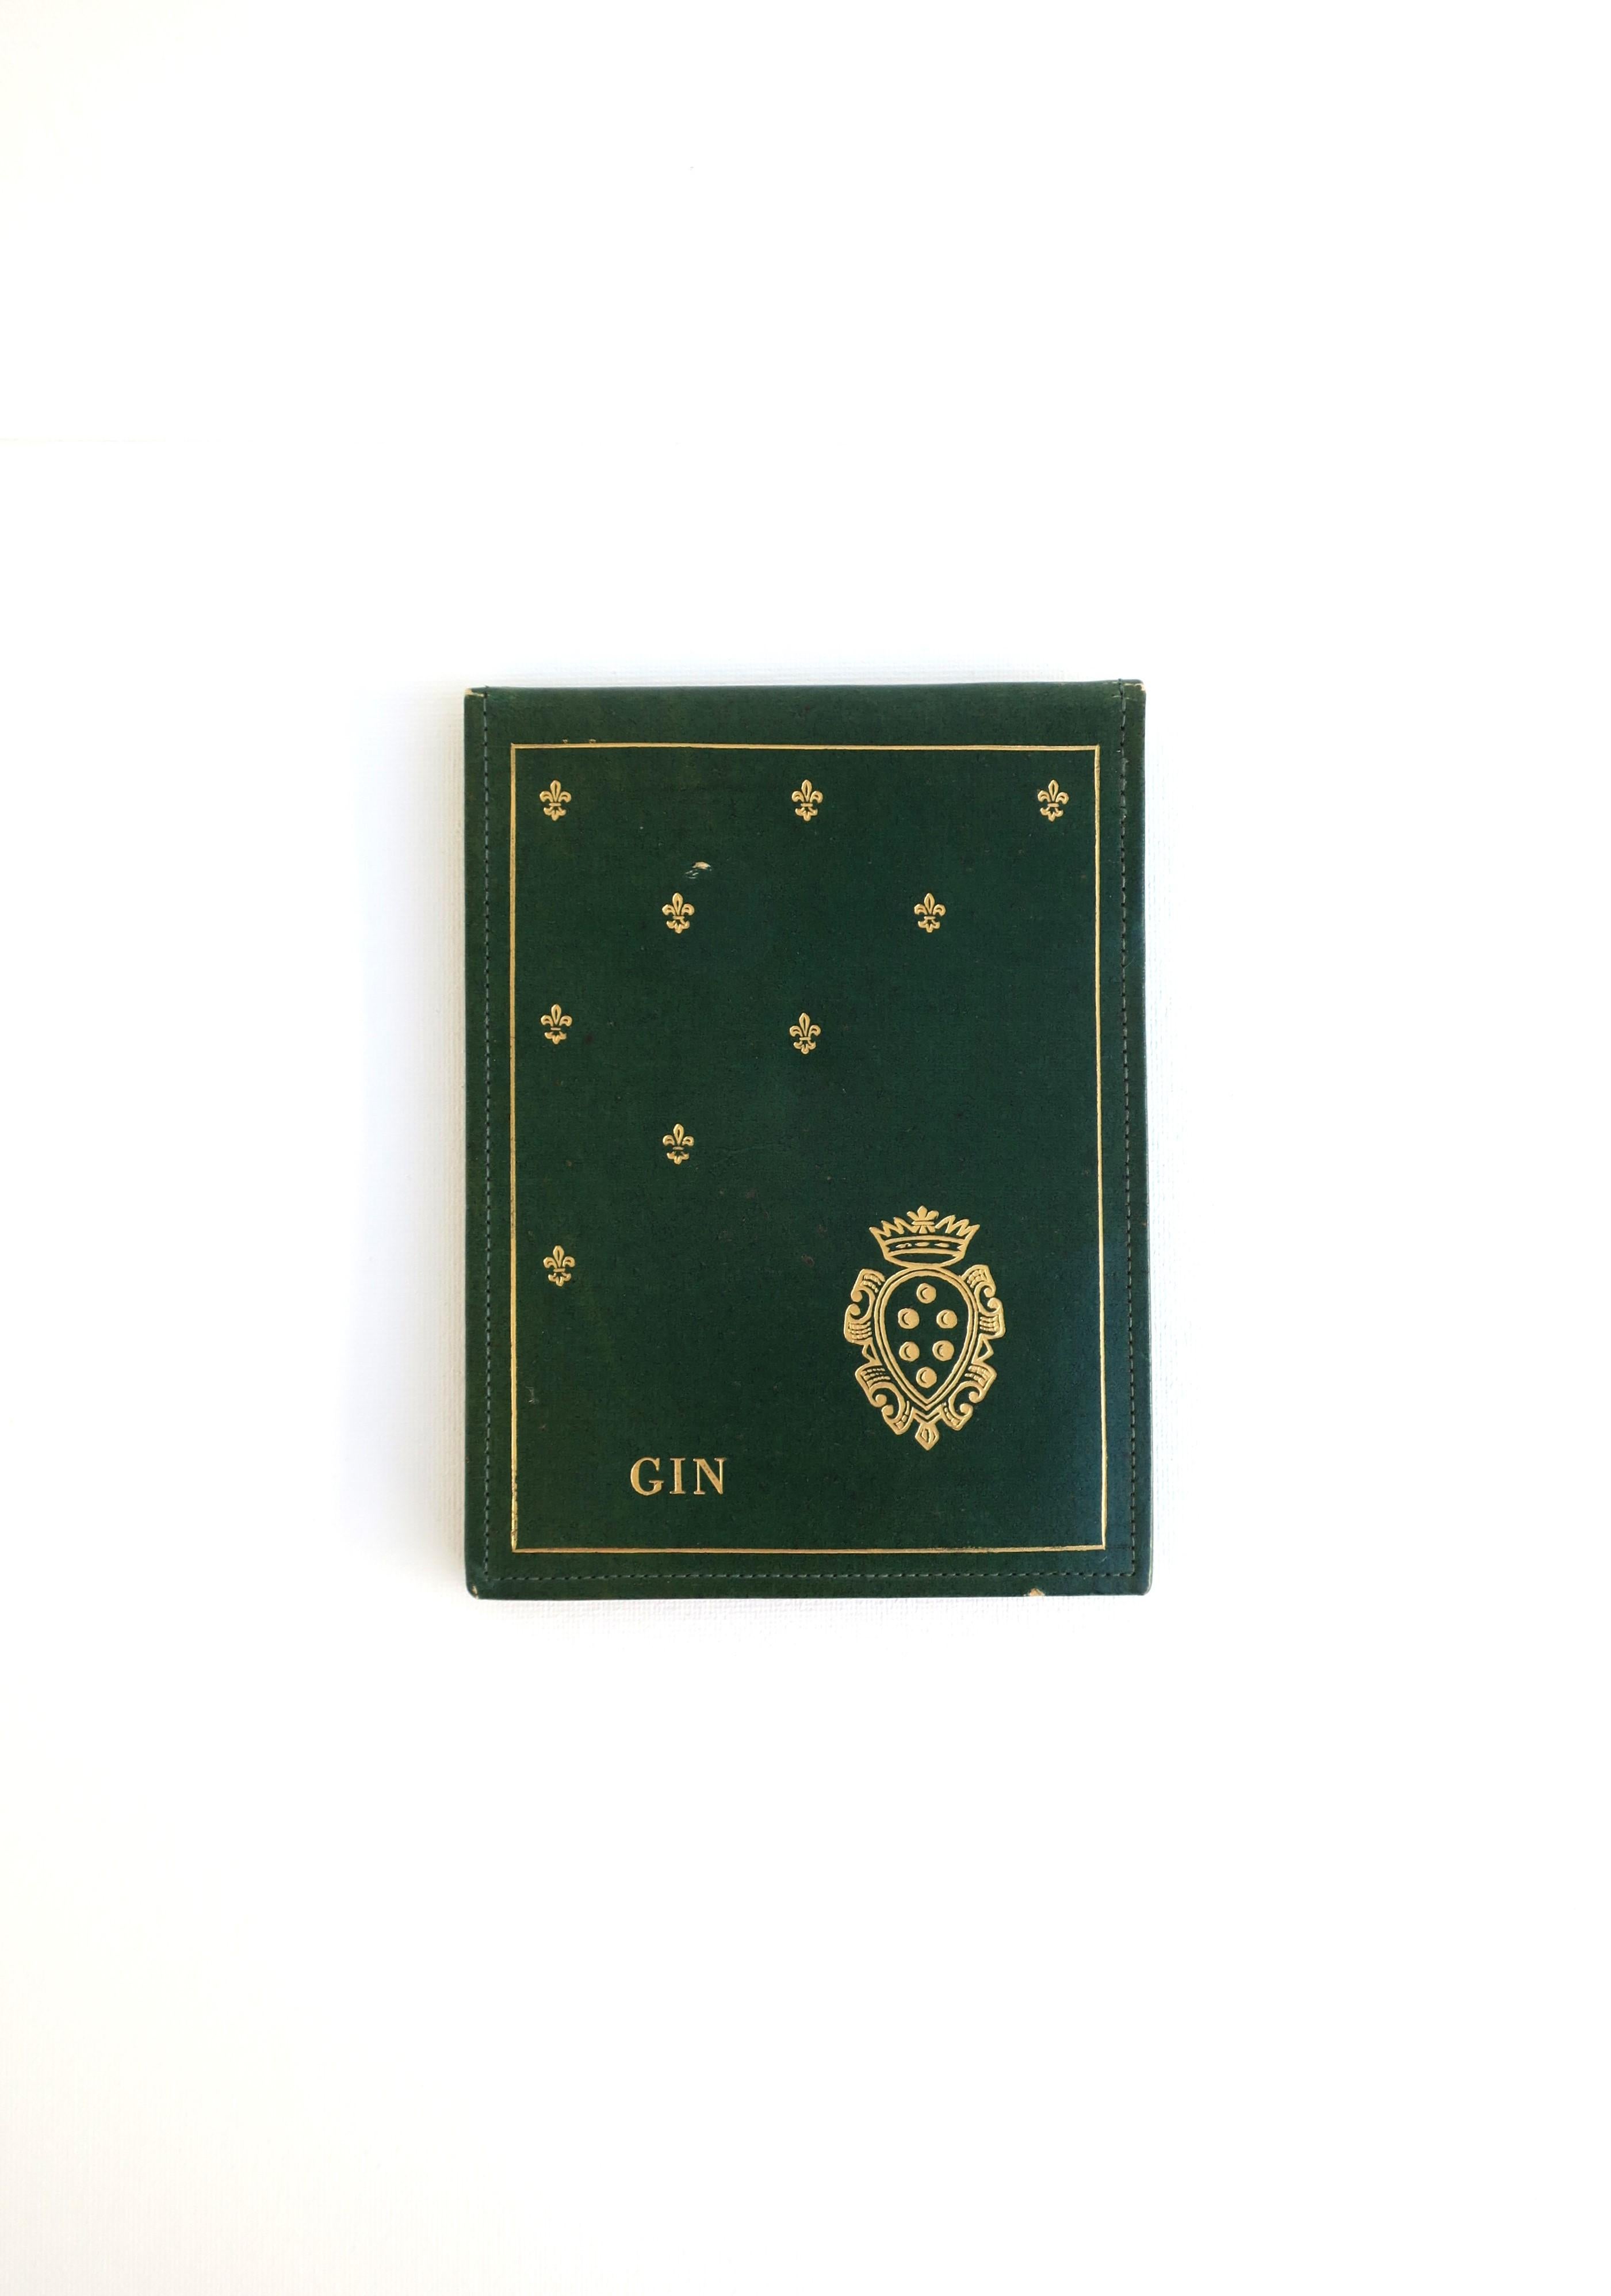 An Italian green and gold Gin card game scoring pad, circa early to mid-20th century, Italy. Piece is faux leather with gold embossing: 'Gin', crest, and Fleurs-de-lis. Marked 'Made in Italy' on lower back as shown in last image. Pad appears to have